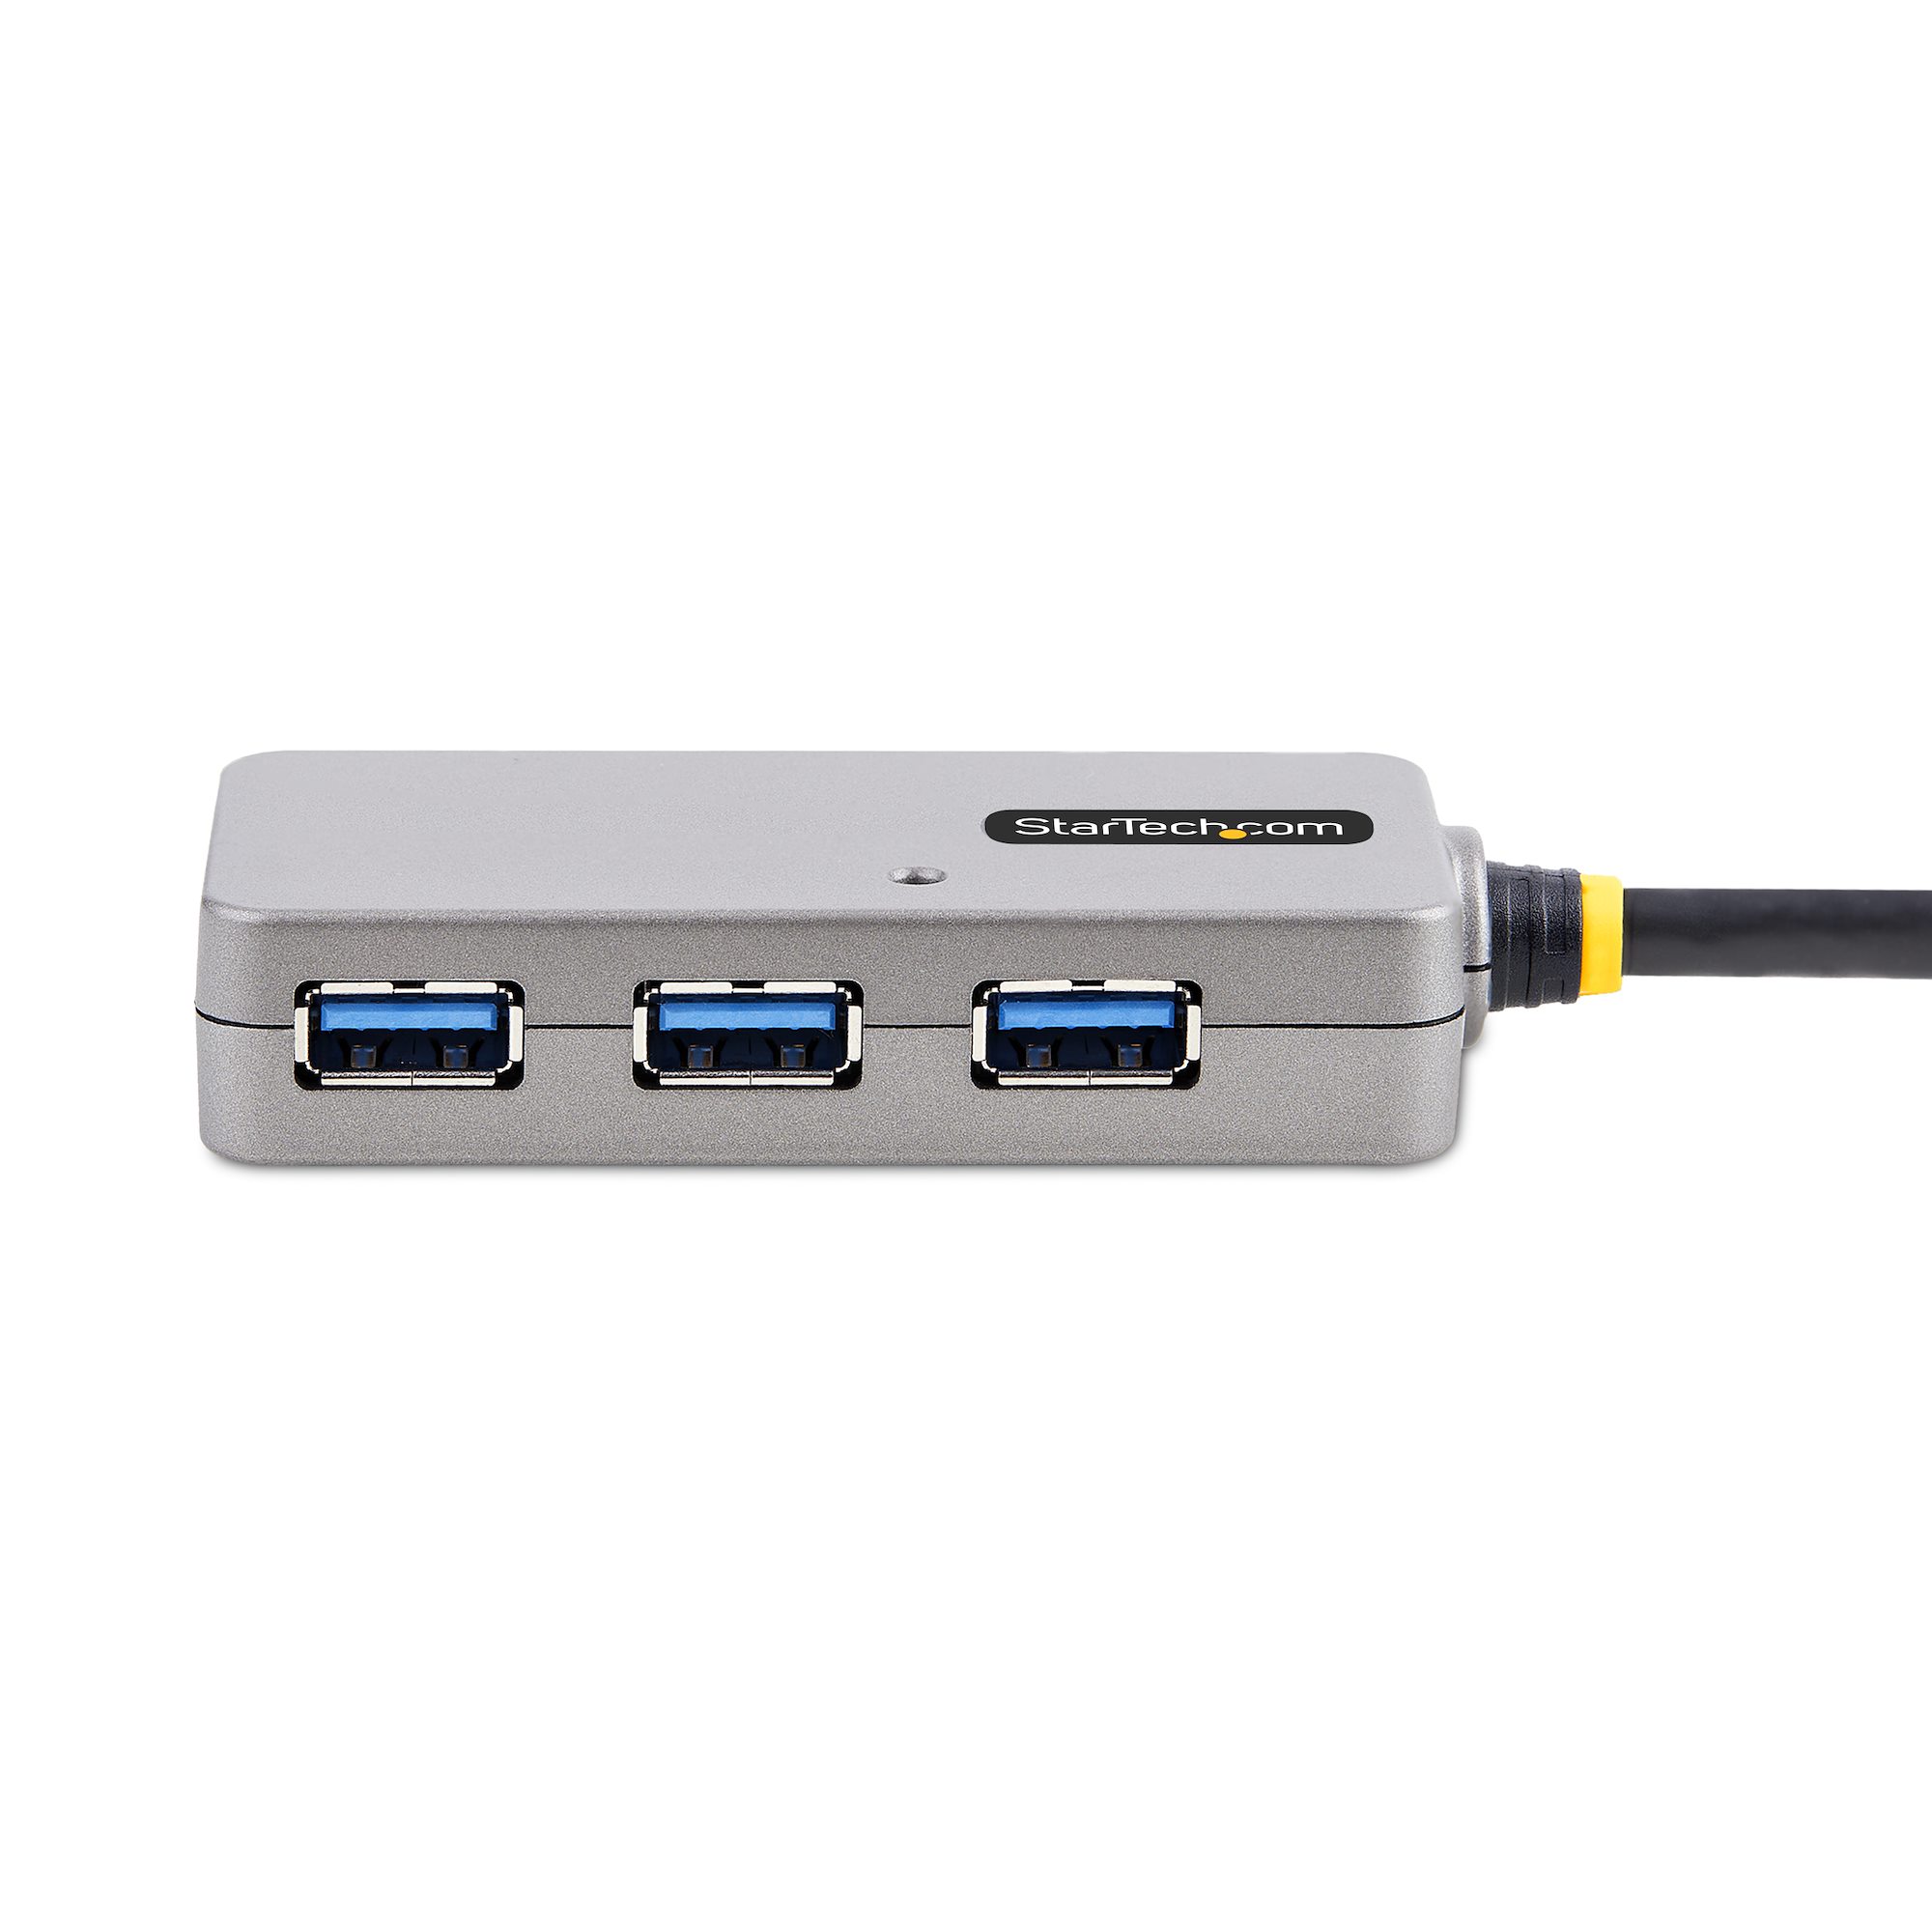 StarTech.com 4 Port USB 3.0 Hub - Multi Port USB Hub w/ Built-in Cable -  Powered USB 3.0 Extender for Your Laptop - White (ST4300MINU3W)